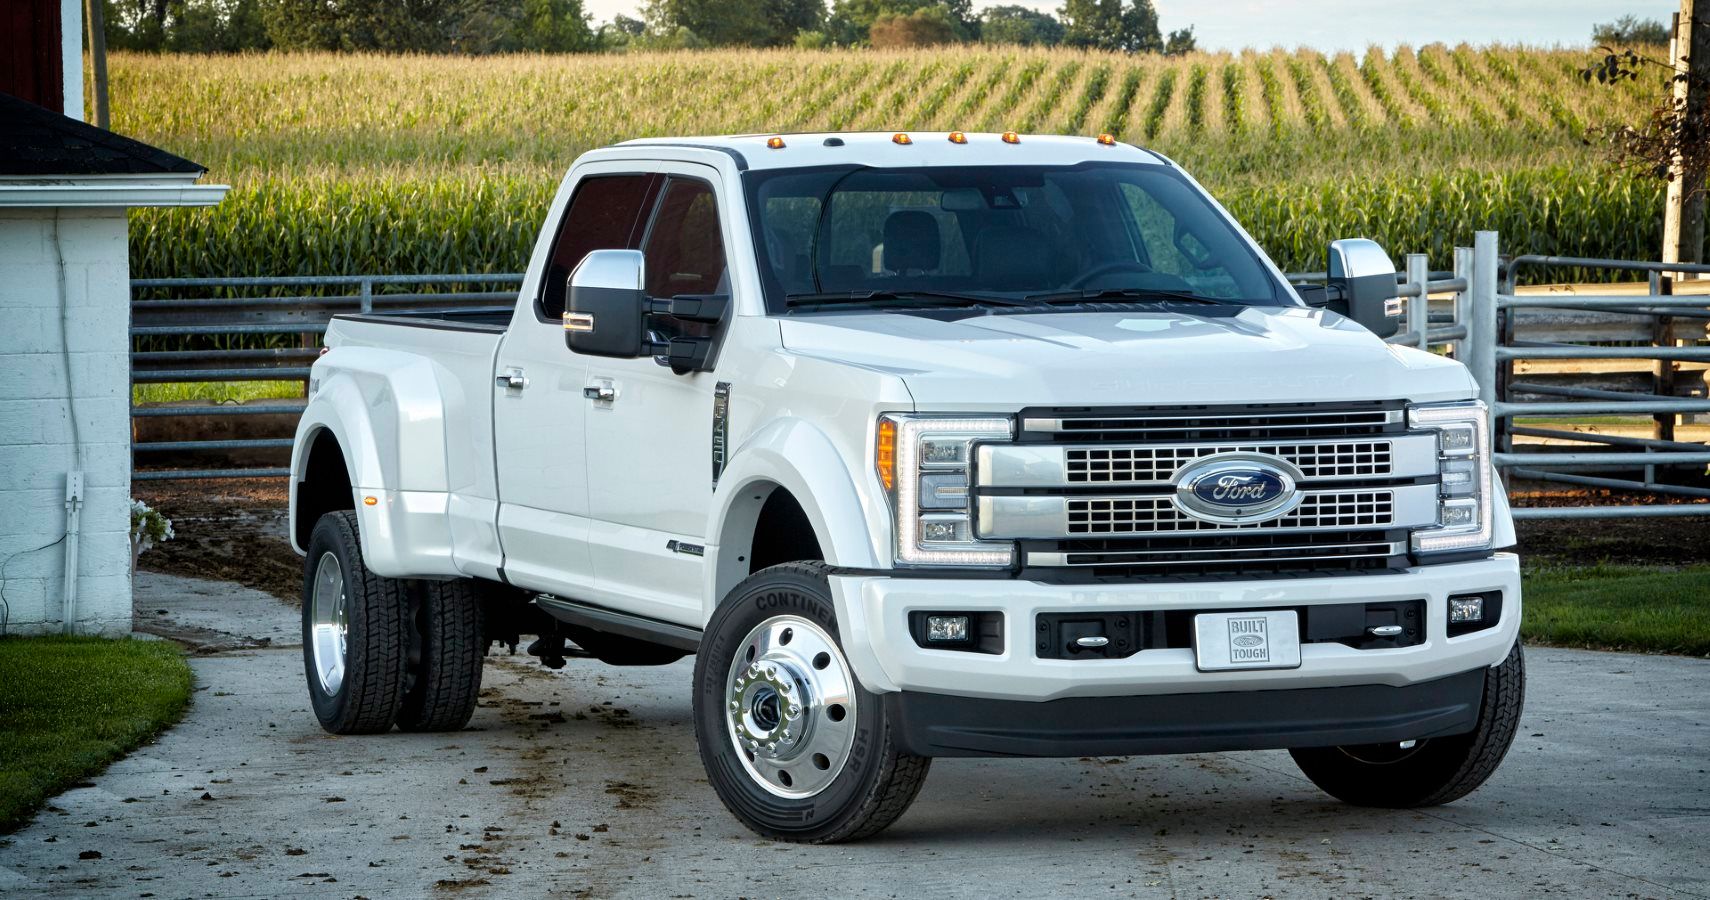 2020 Ford Super Duty Spotted In Construction Zone